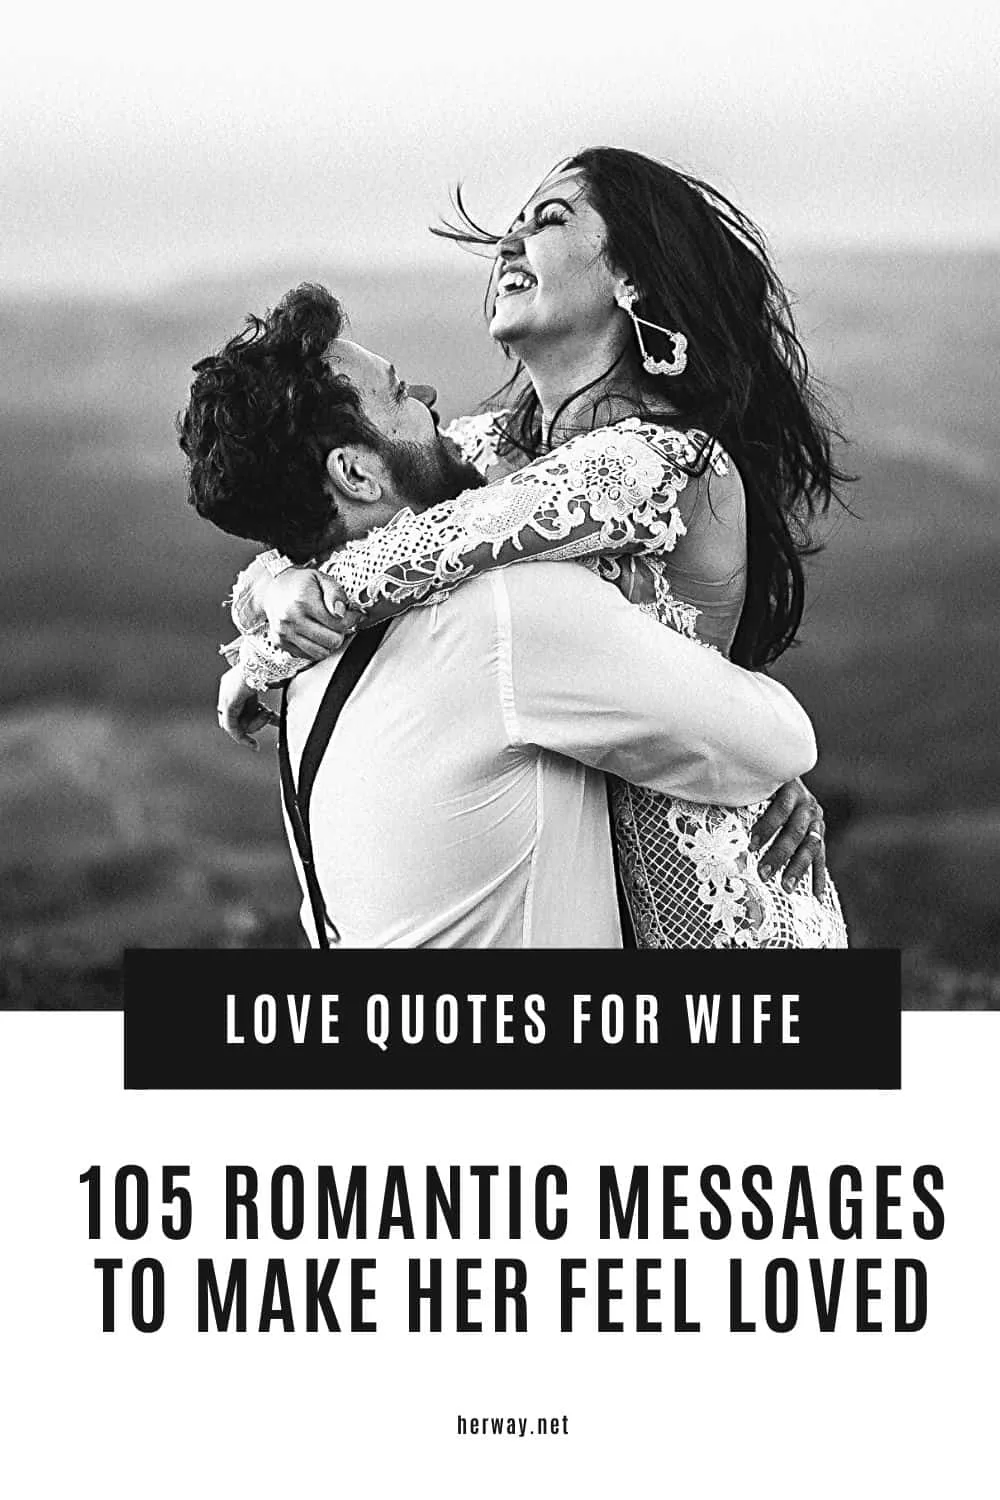 Love Quotes For Wife 105 Romantic Messages To Make Her Feel Loved Pinterest